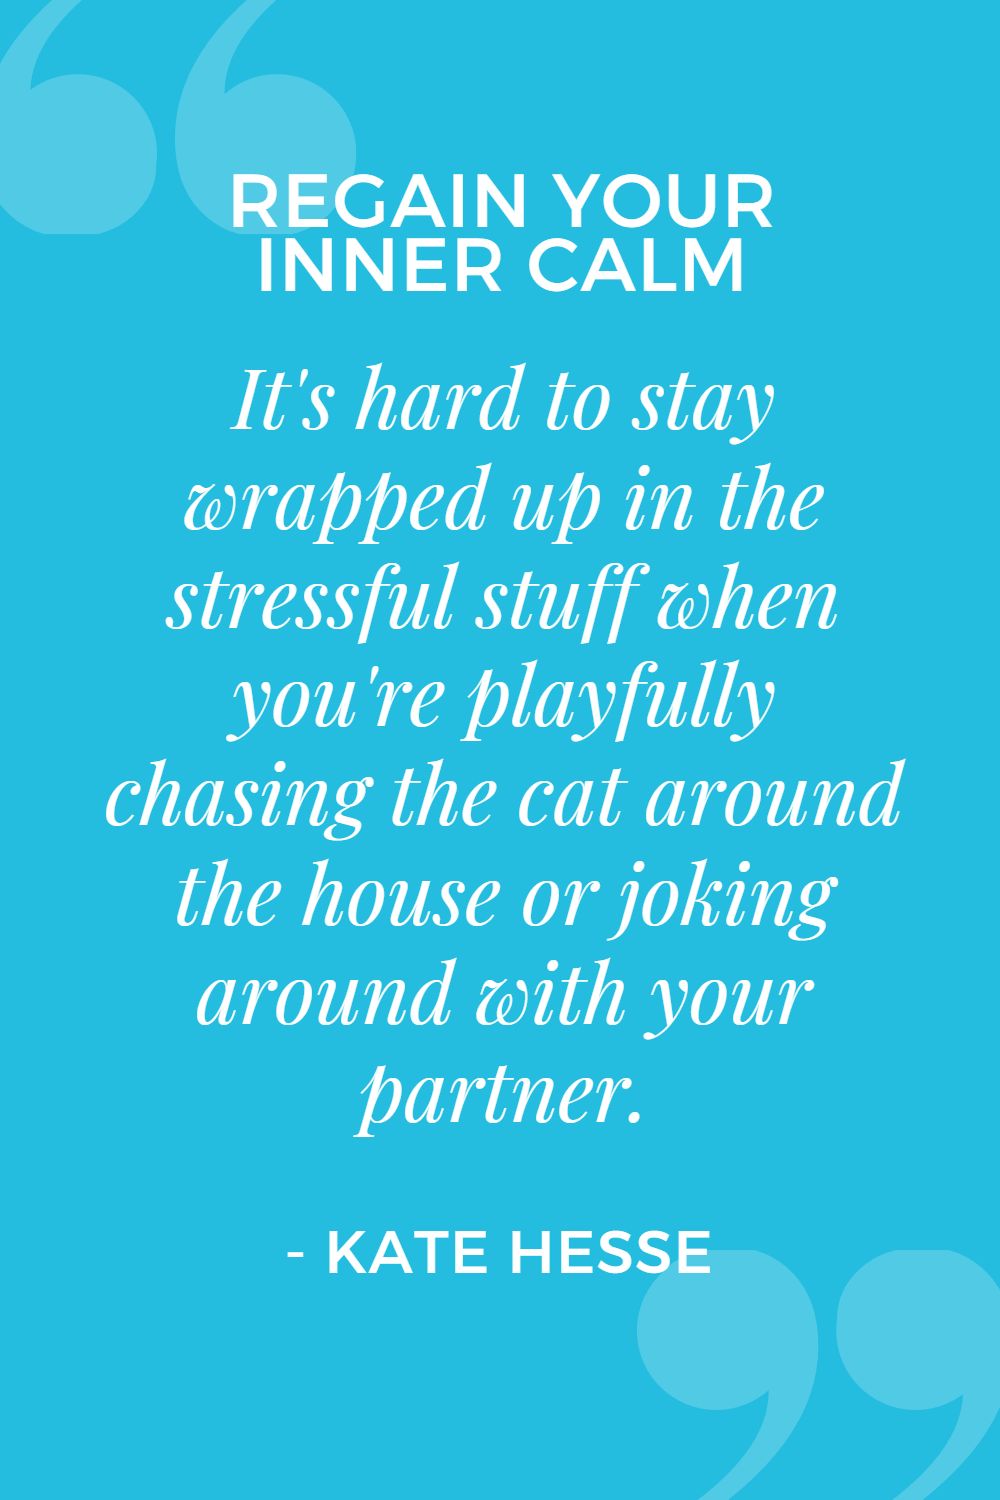 It's hard to stay wrapped up in the stressful stuff when you're playfully chasing the cat around the house or joking around with your partner.